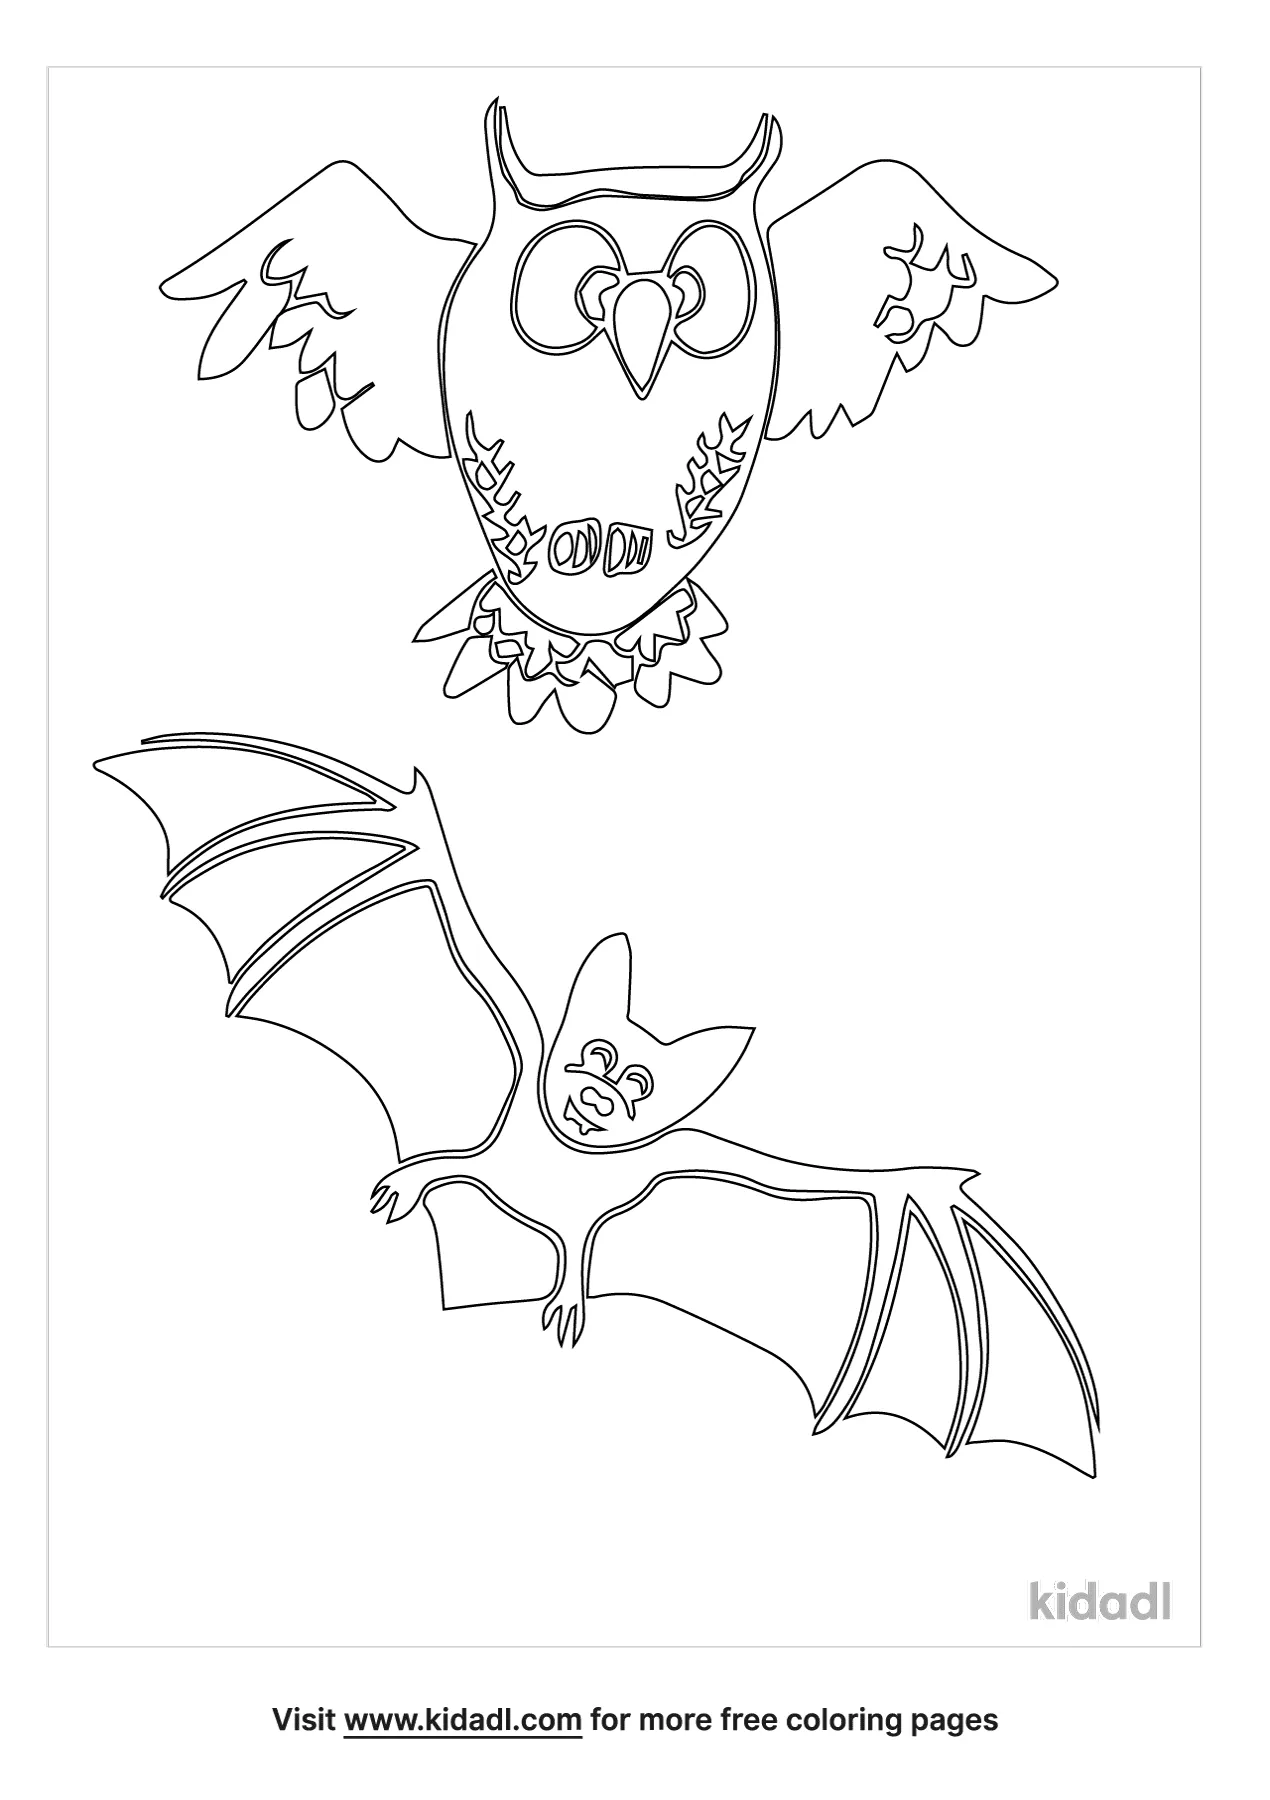 Free Night Animals Coloring Page | Coloring Page Printables | Kidadl